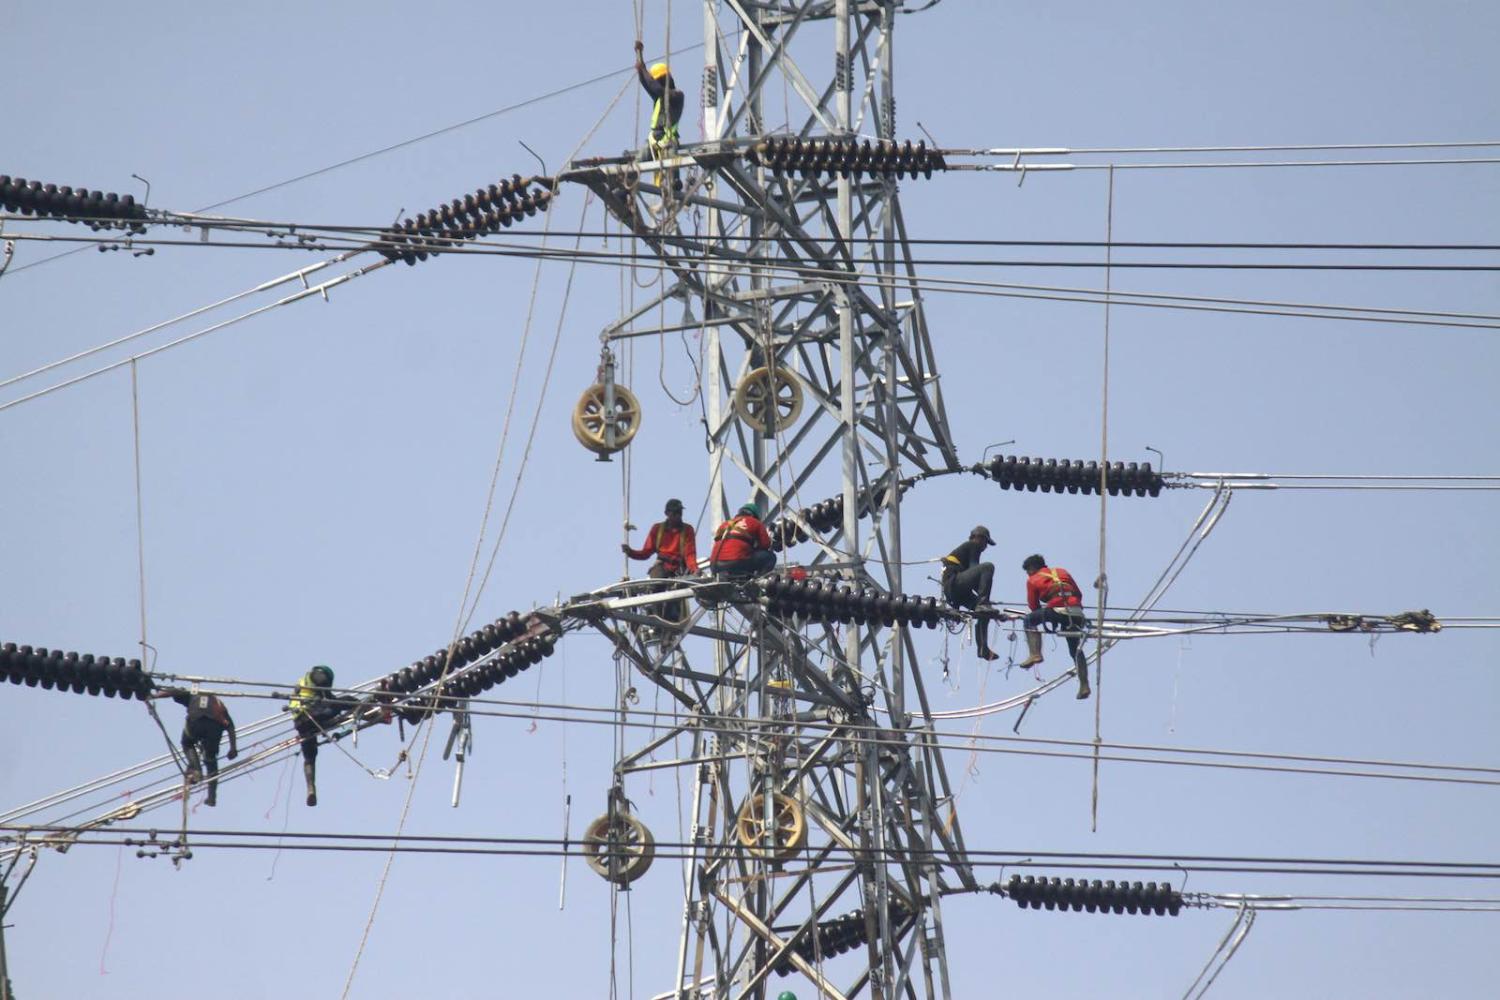 Workers installing high voltage lines for a 35,000 MW electricity project in Jakarta, December 2019 (Aditya Irawan/NurPhoto via Getty Images)